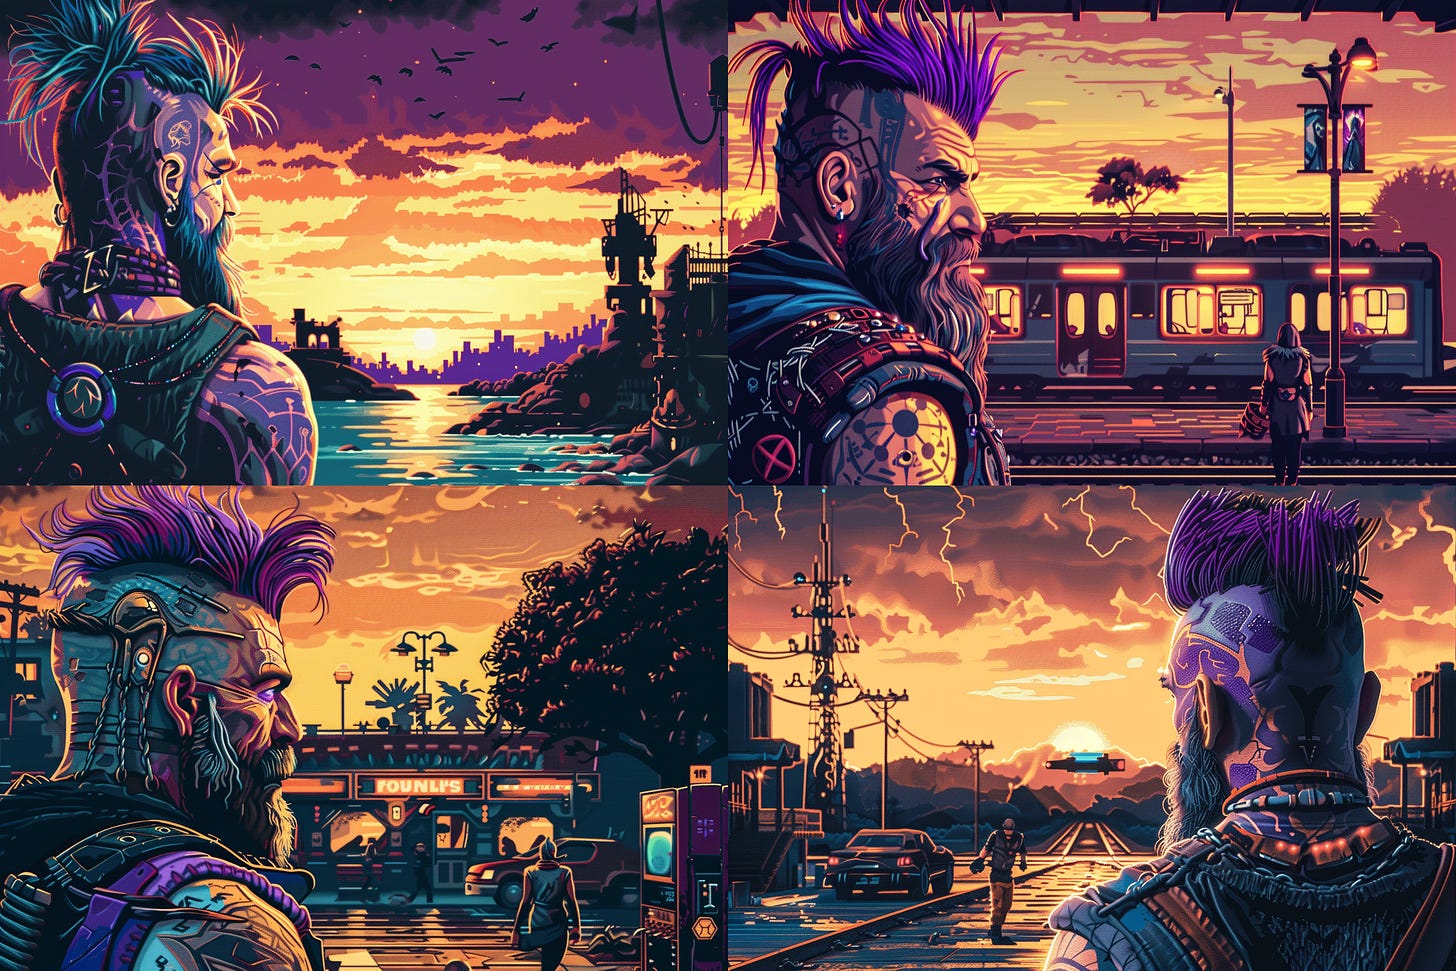 Viking in a futuristic city rendered in 16-bit graphics